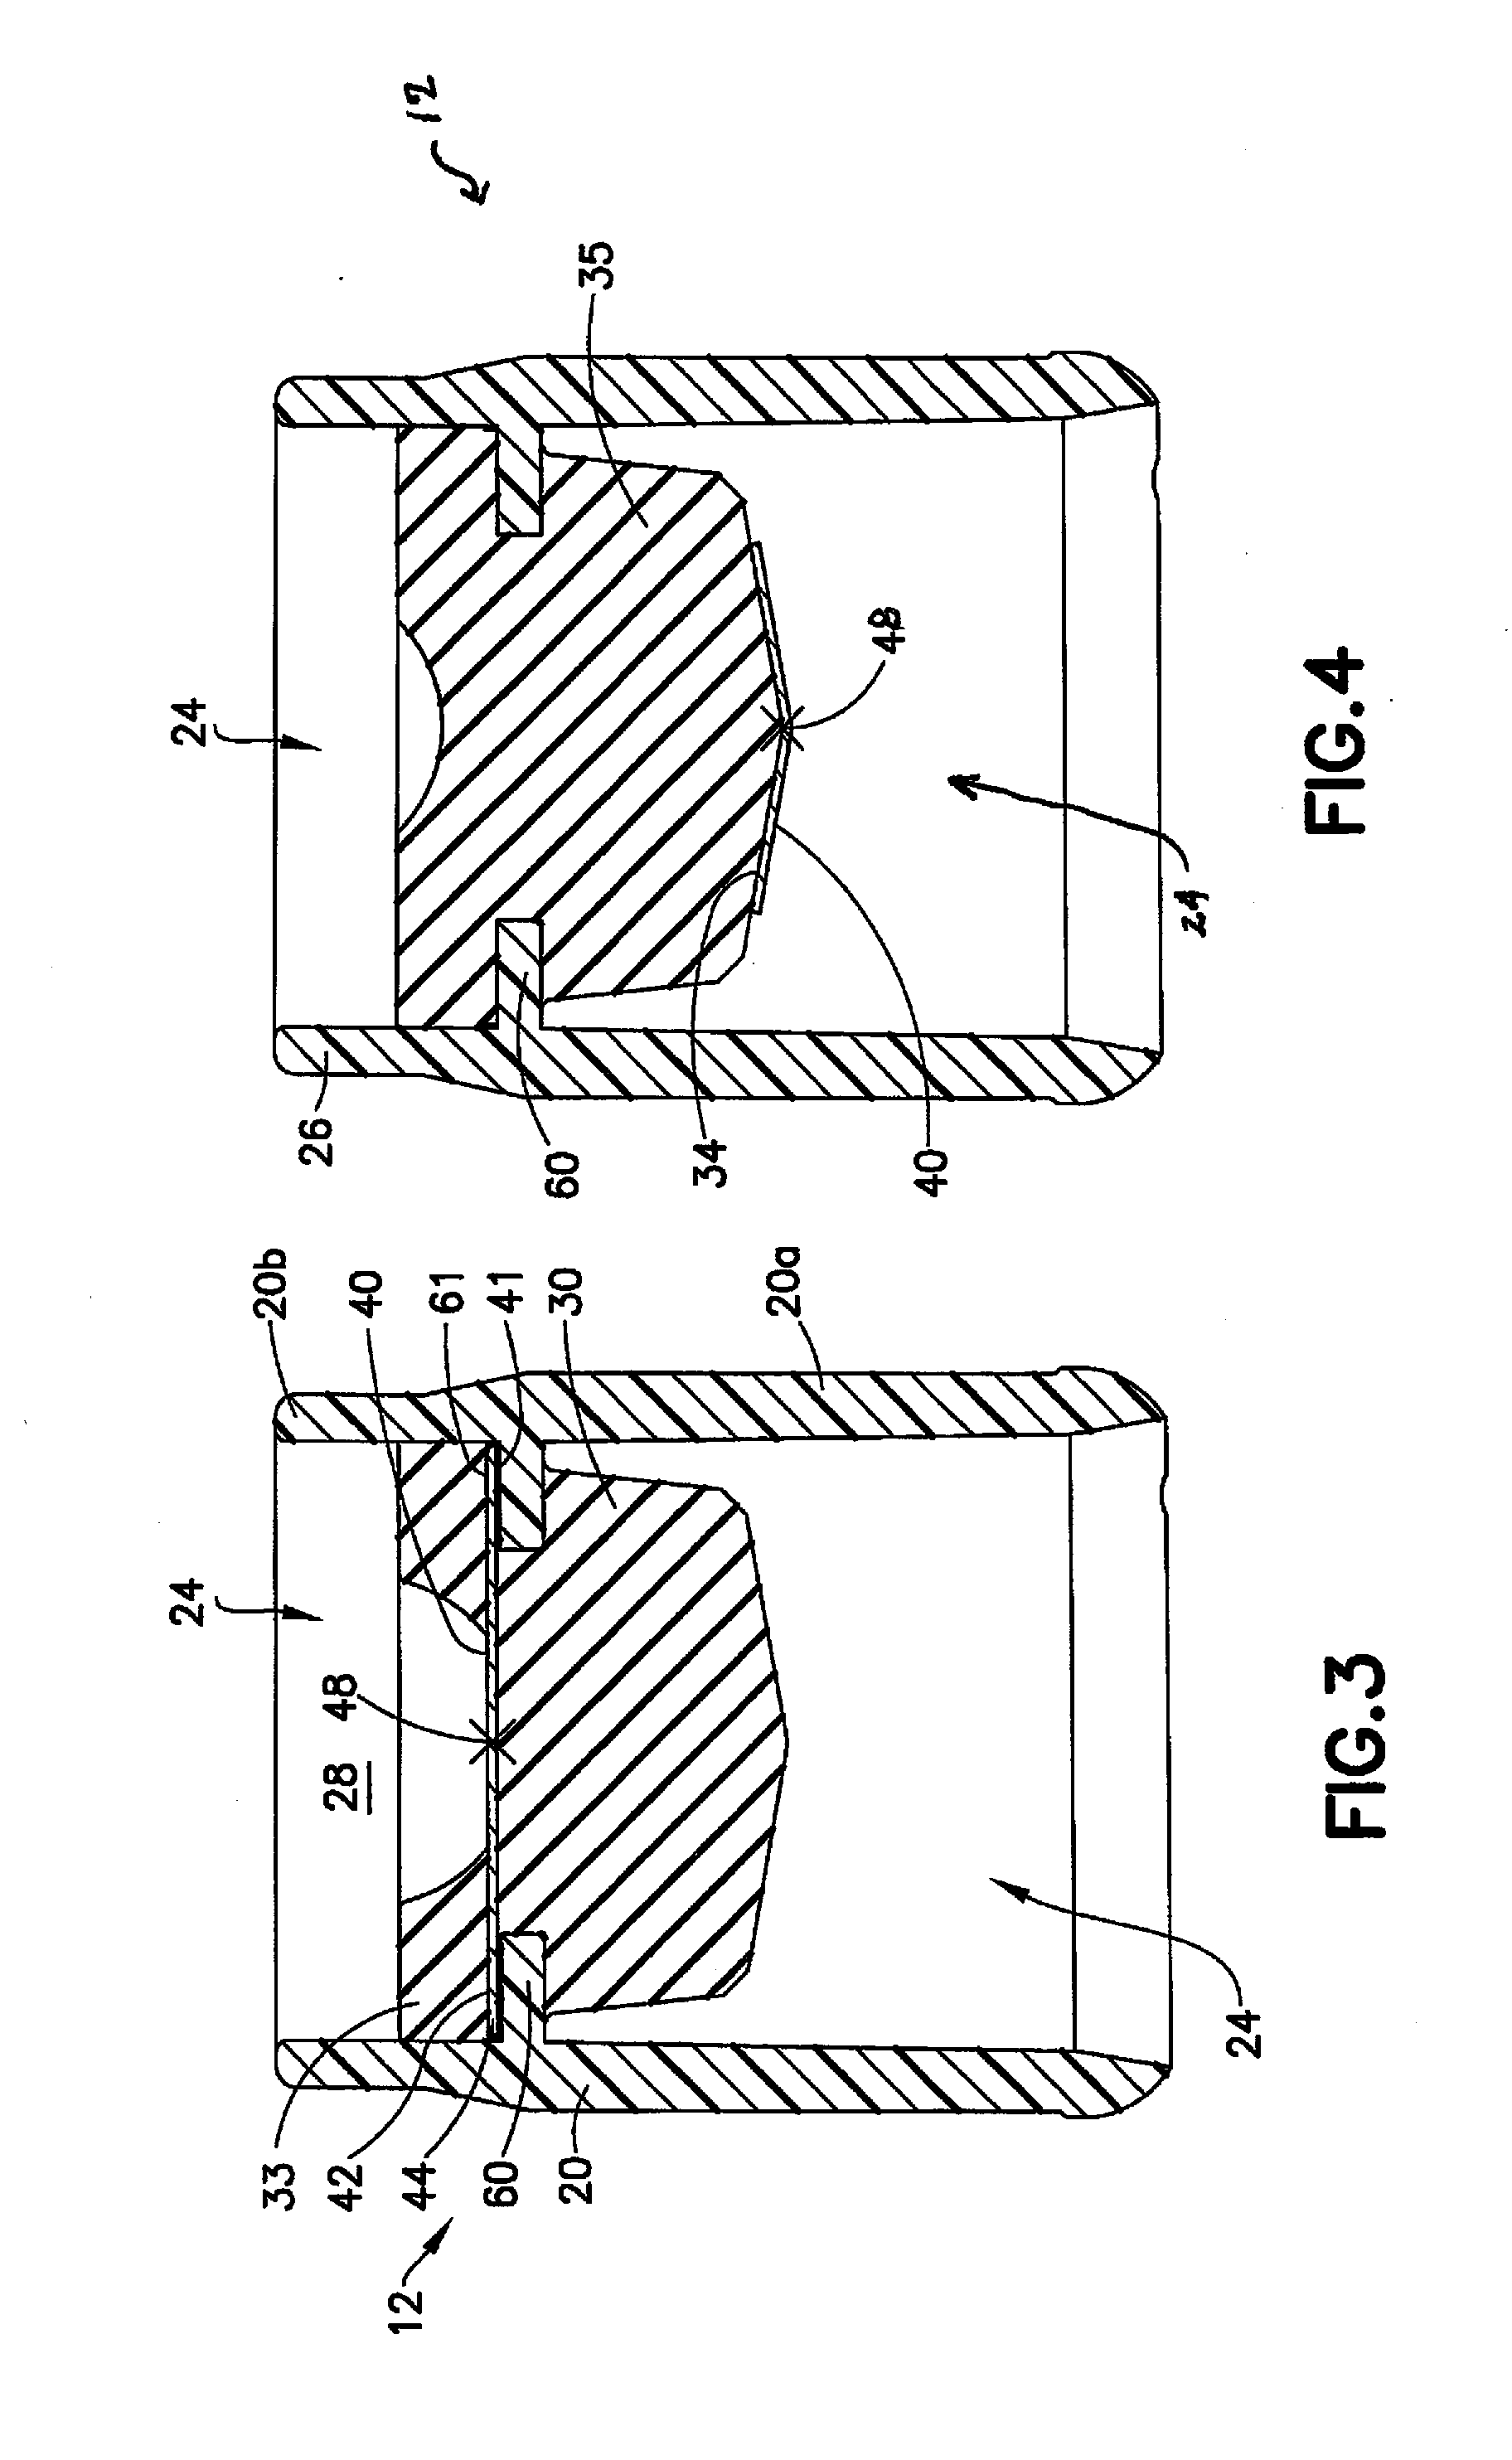 One-Piece Safety Tube Closure with Film Element